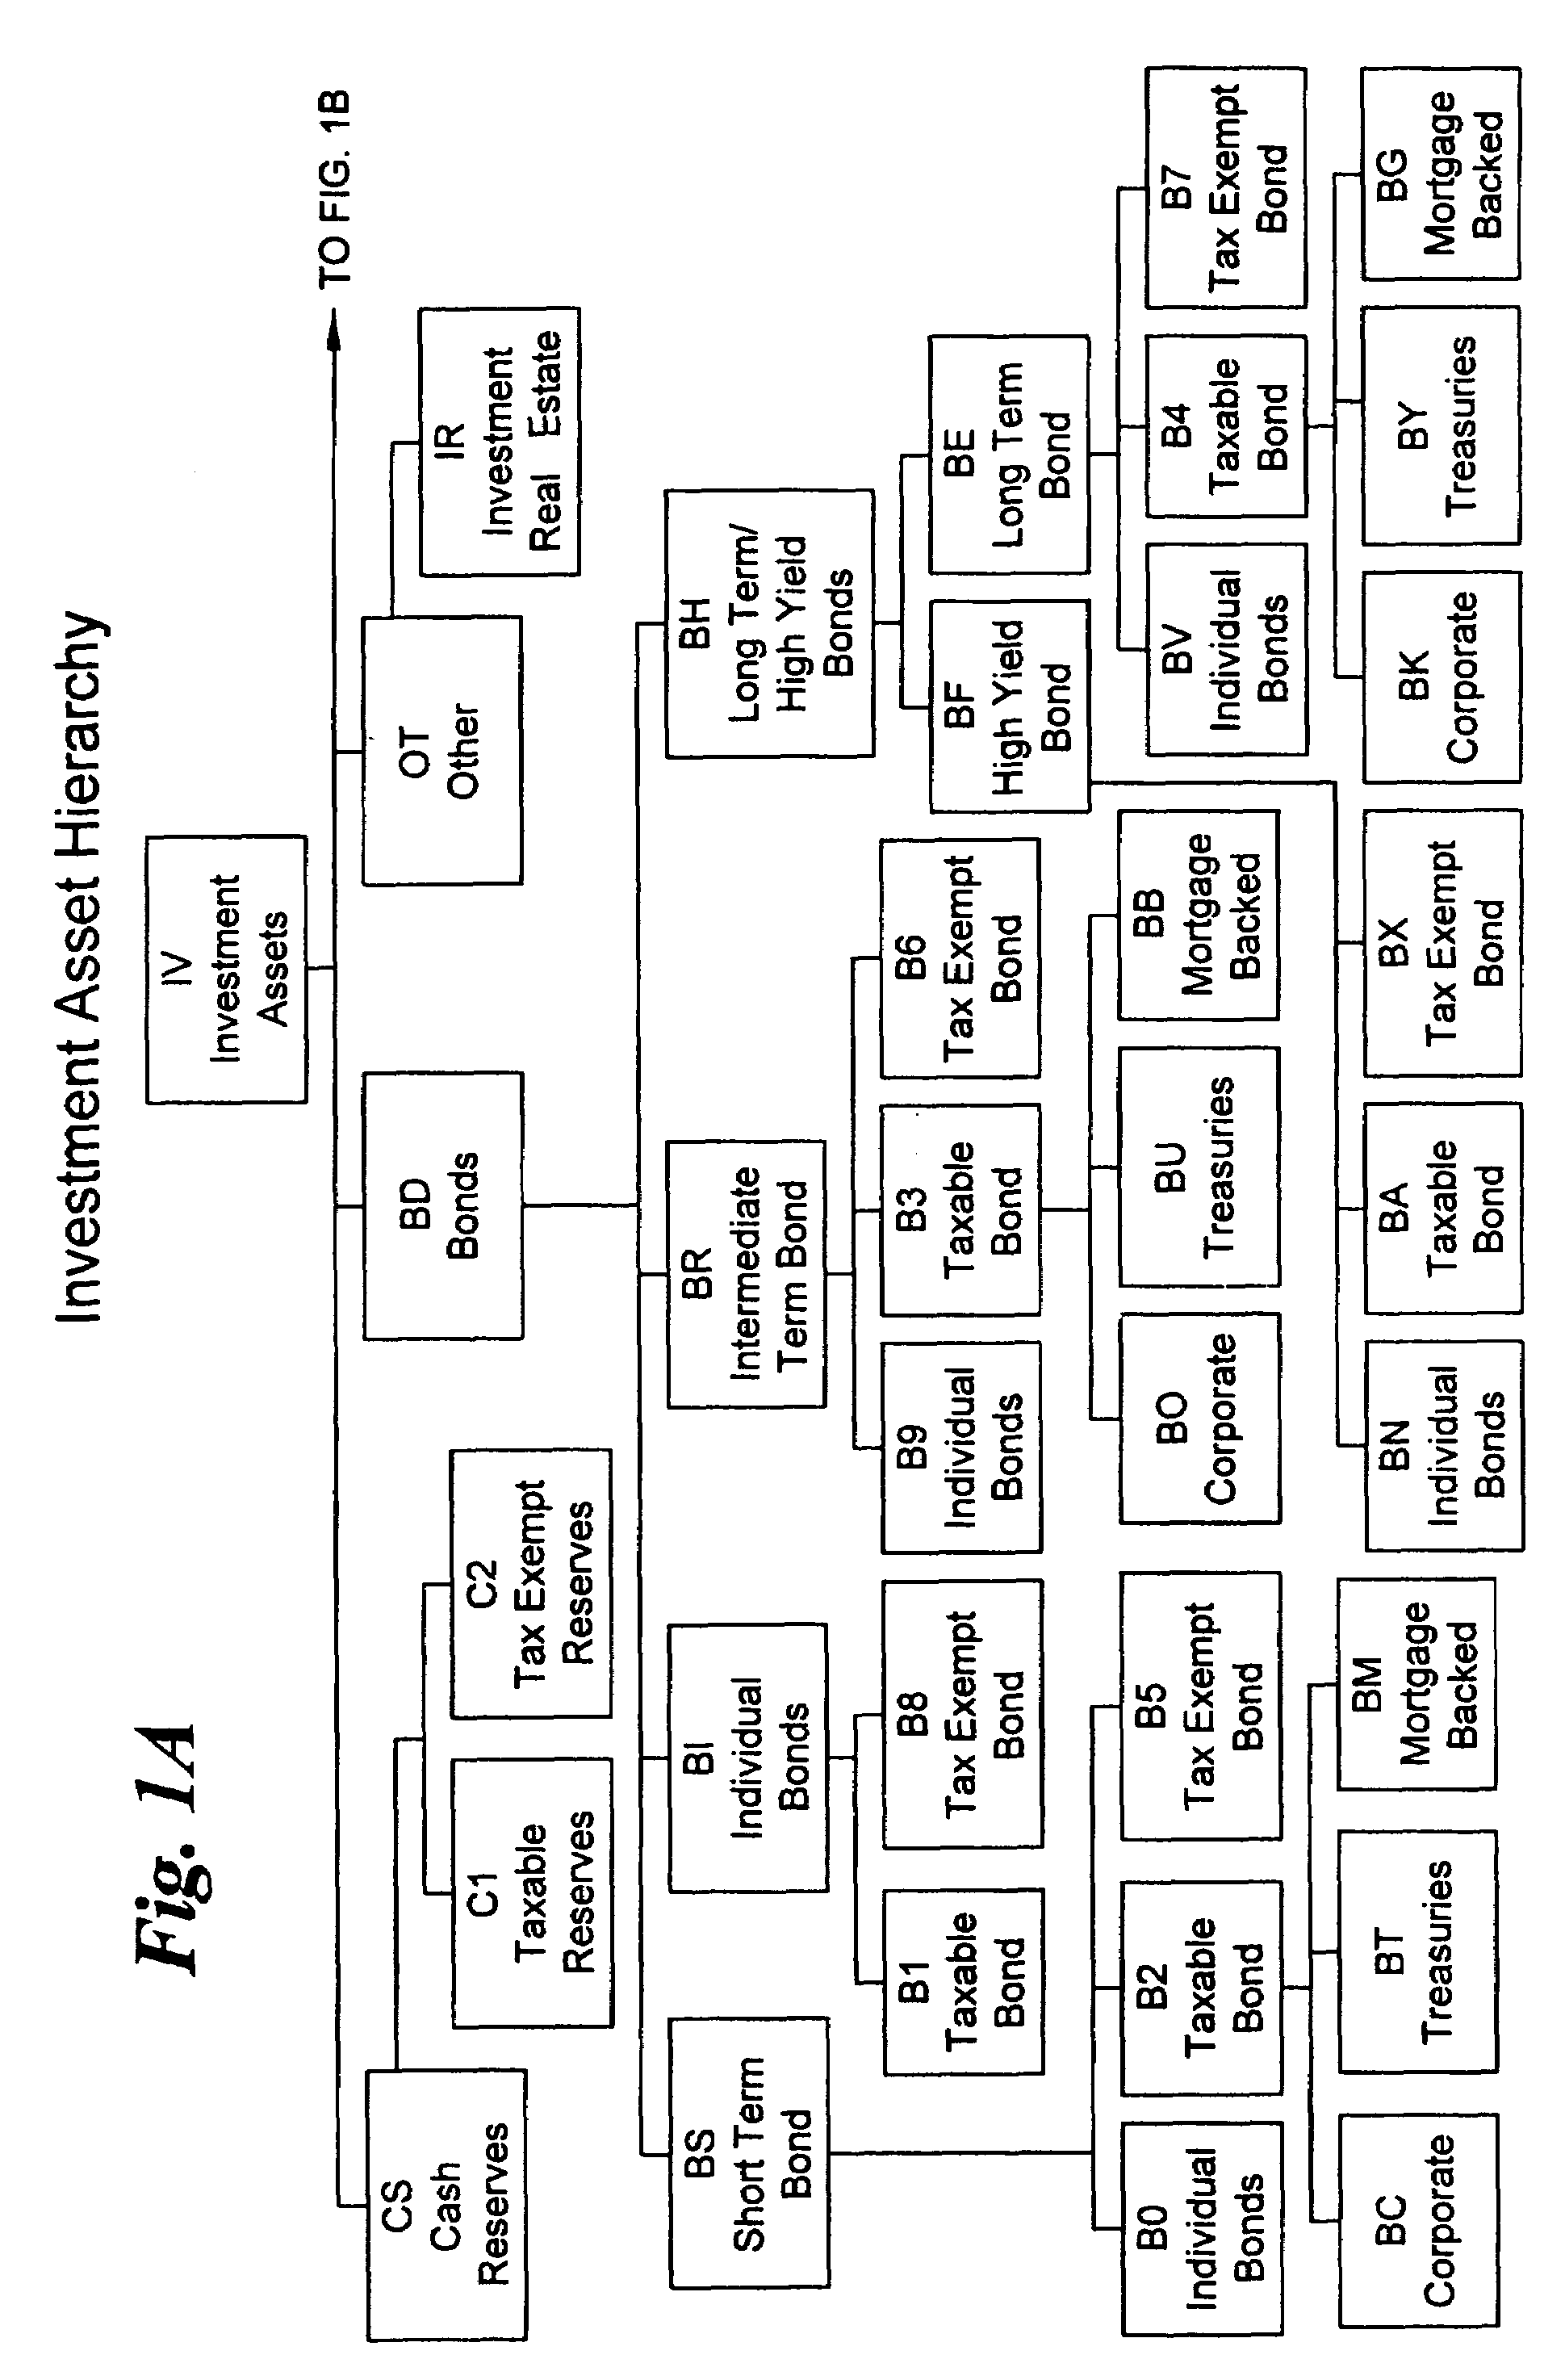 System and method for automating investment planning